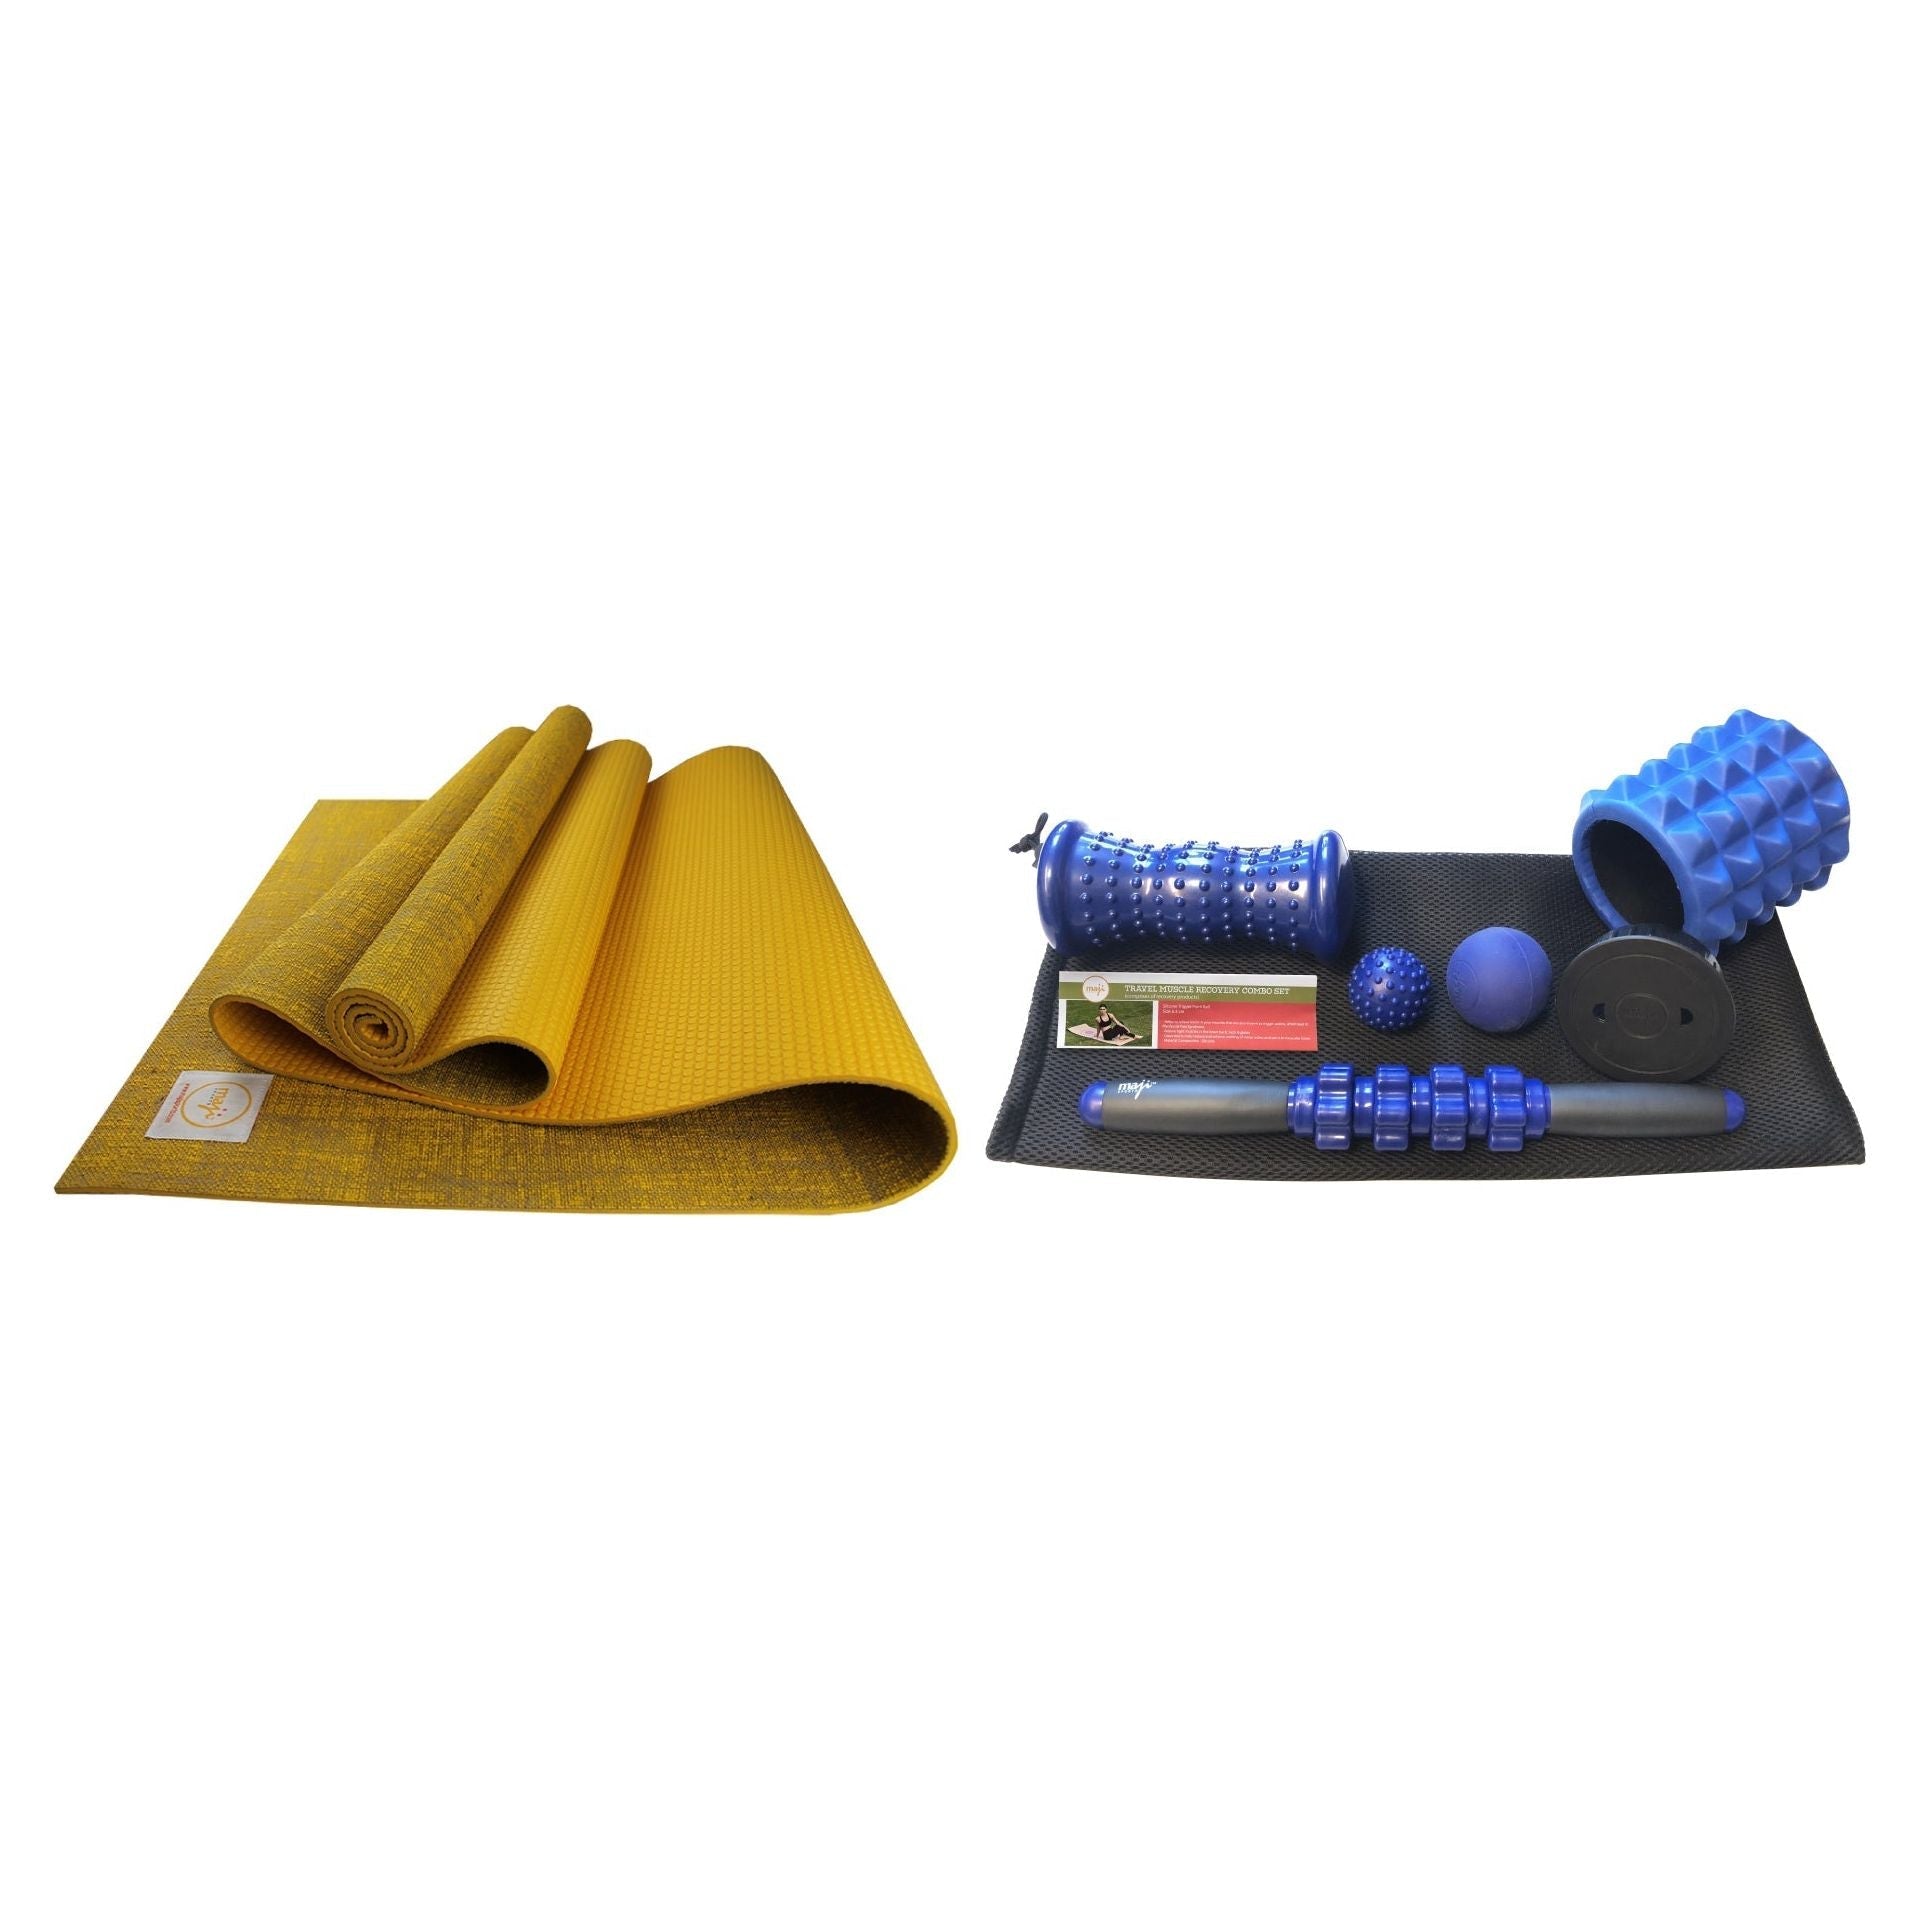 Jute Premium ECO Fitness, pilates, Yoga Mat + Muscle recovery Bundle - KME means the very best